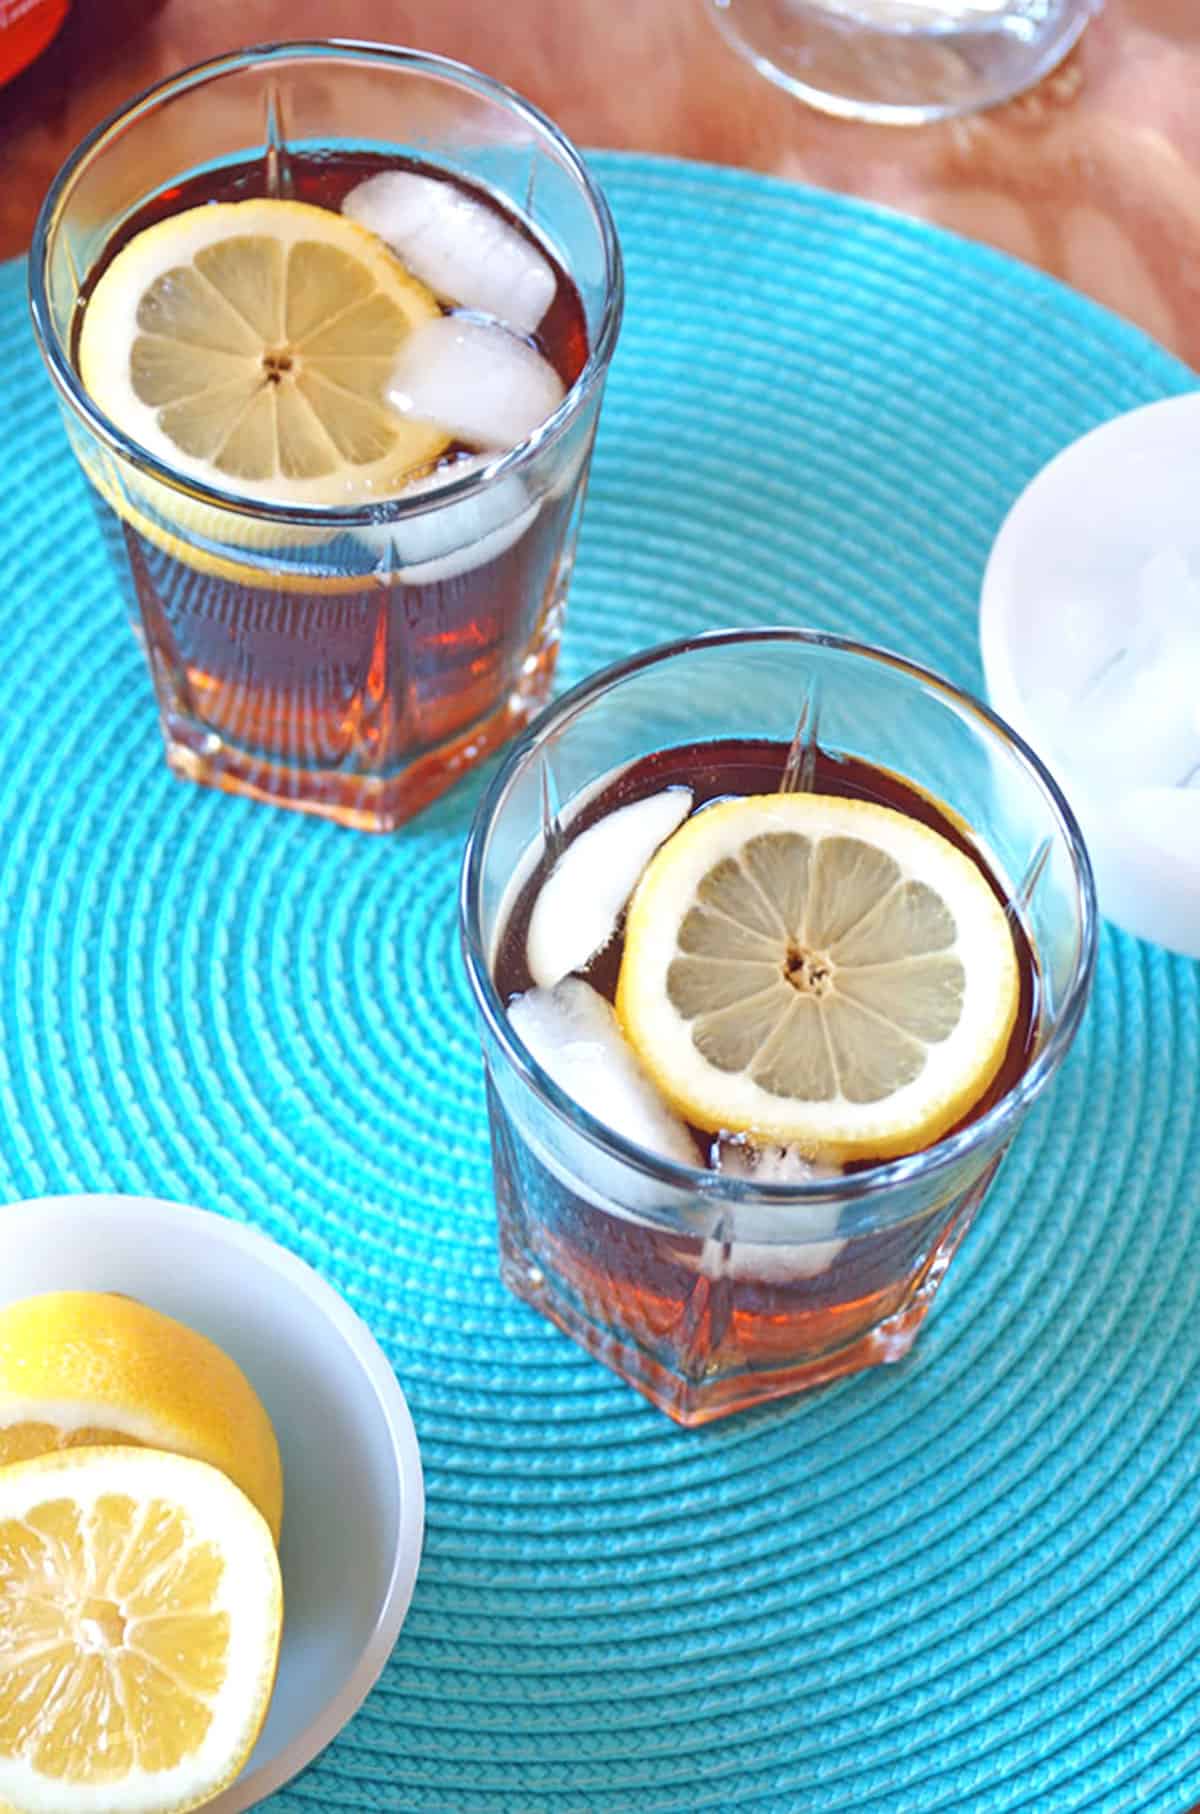 This Iced Tea and Rum Cocktail has just three ingredients and is so refreshing! An easy summer drink to enjoy with friends.